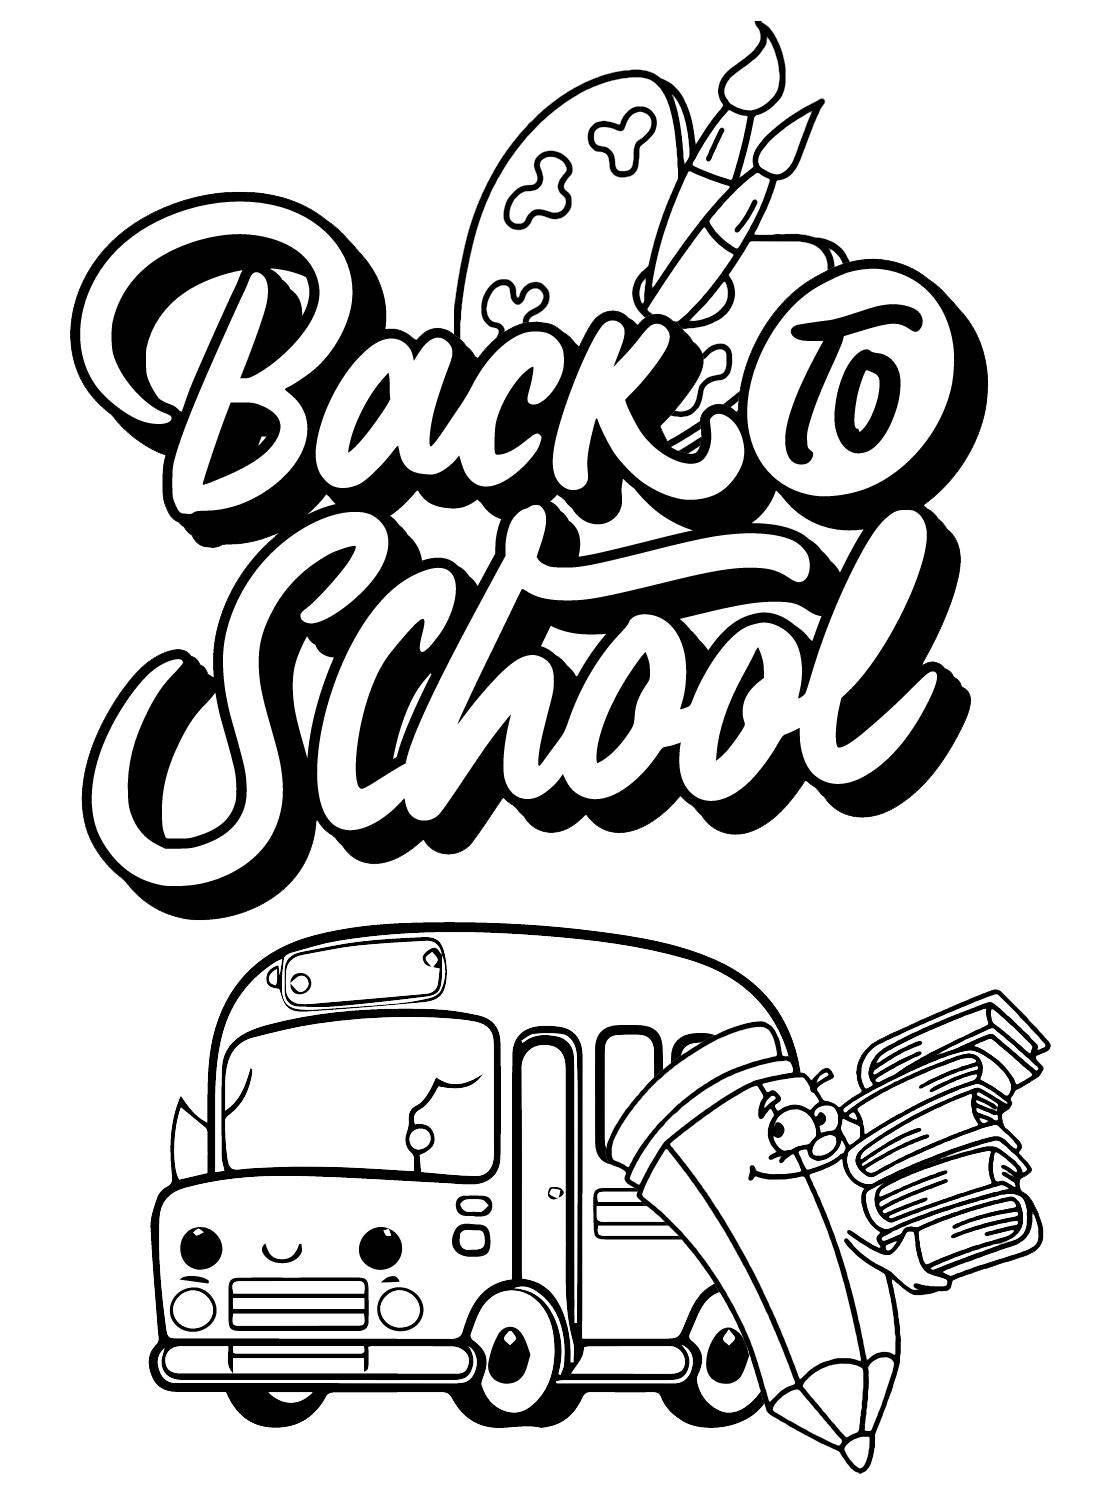 Free Printable Back to School Coloring Page from Back to School